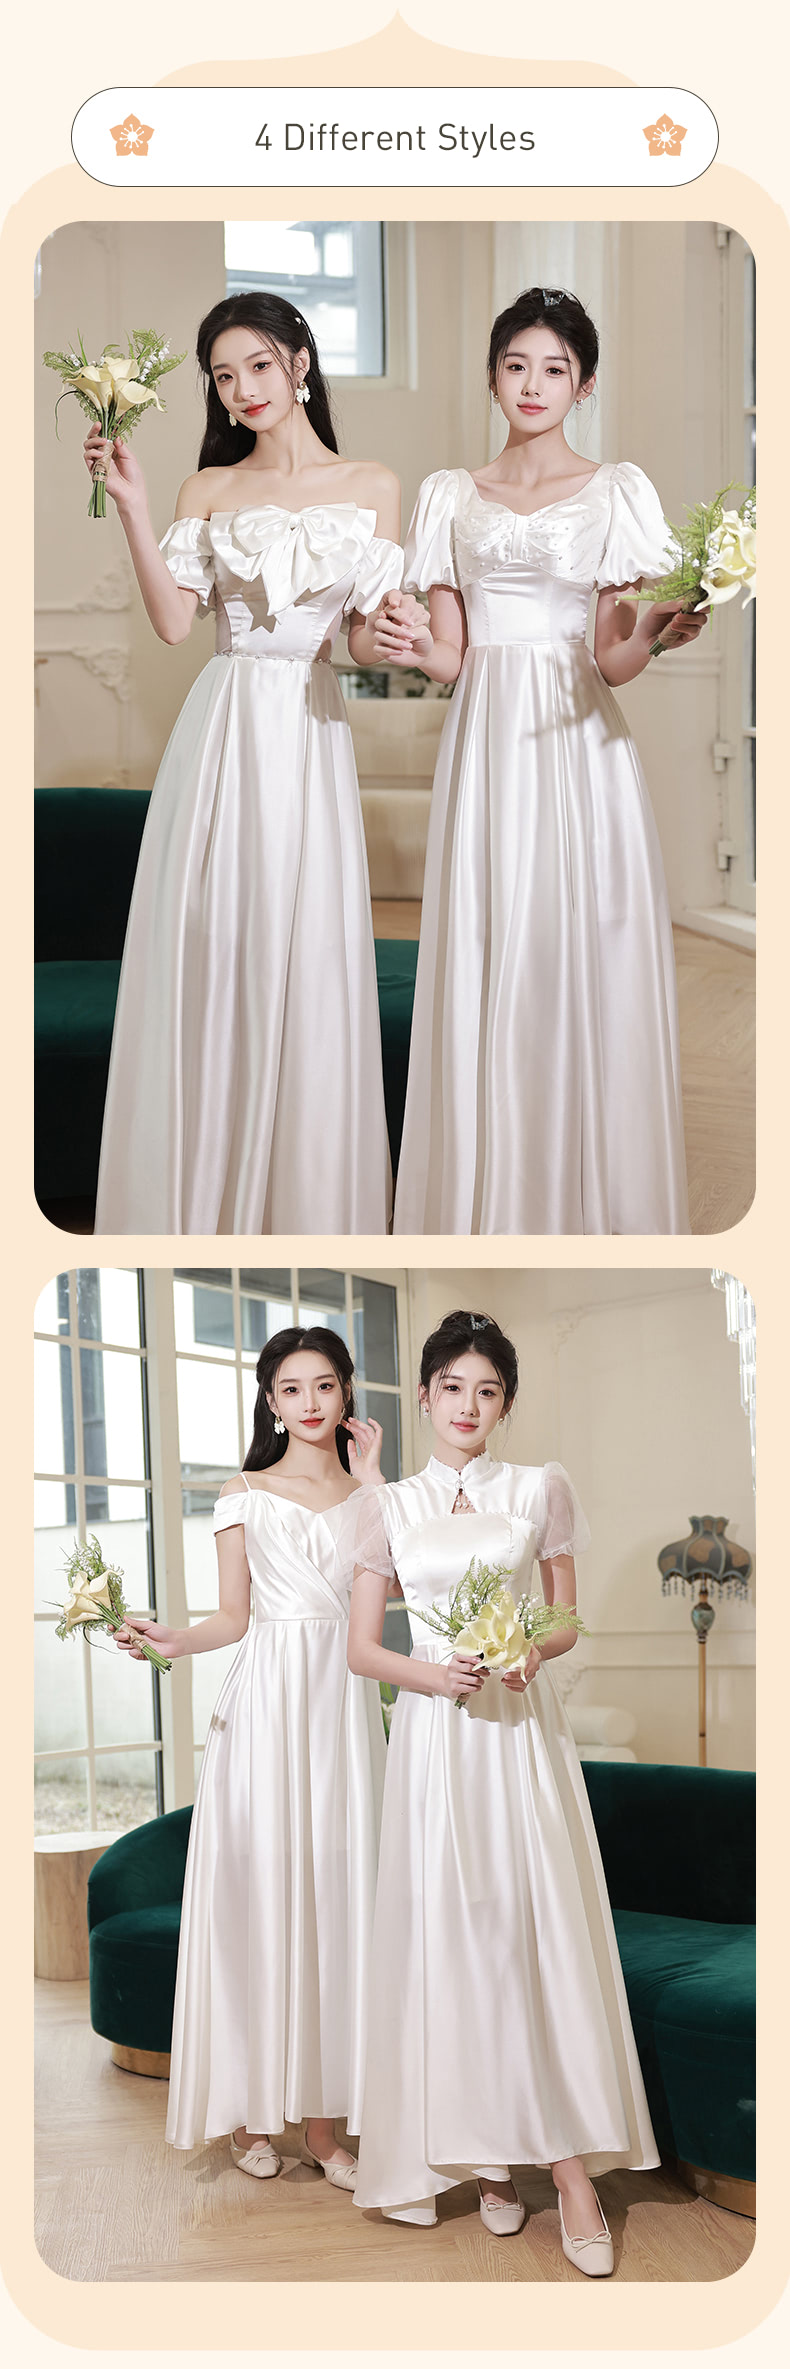 Sweet-White-Satin-Wedding-Party-Dress-Homecoming-Evening-Gown13